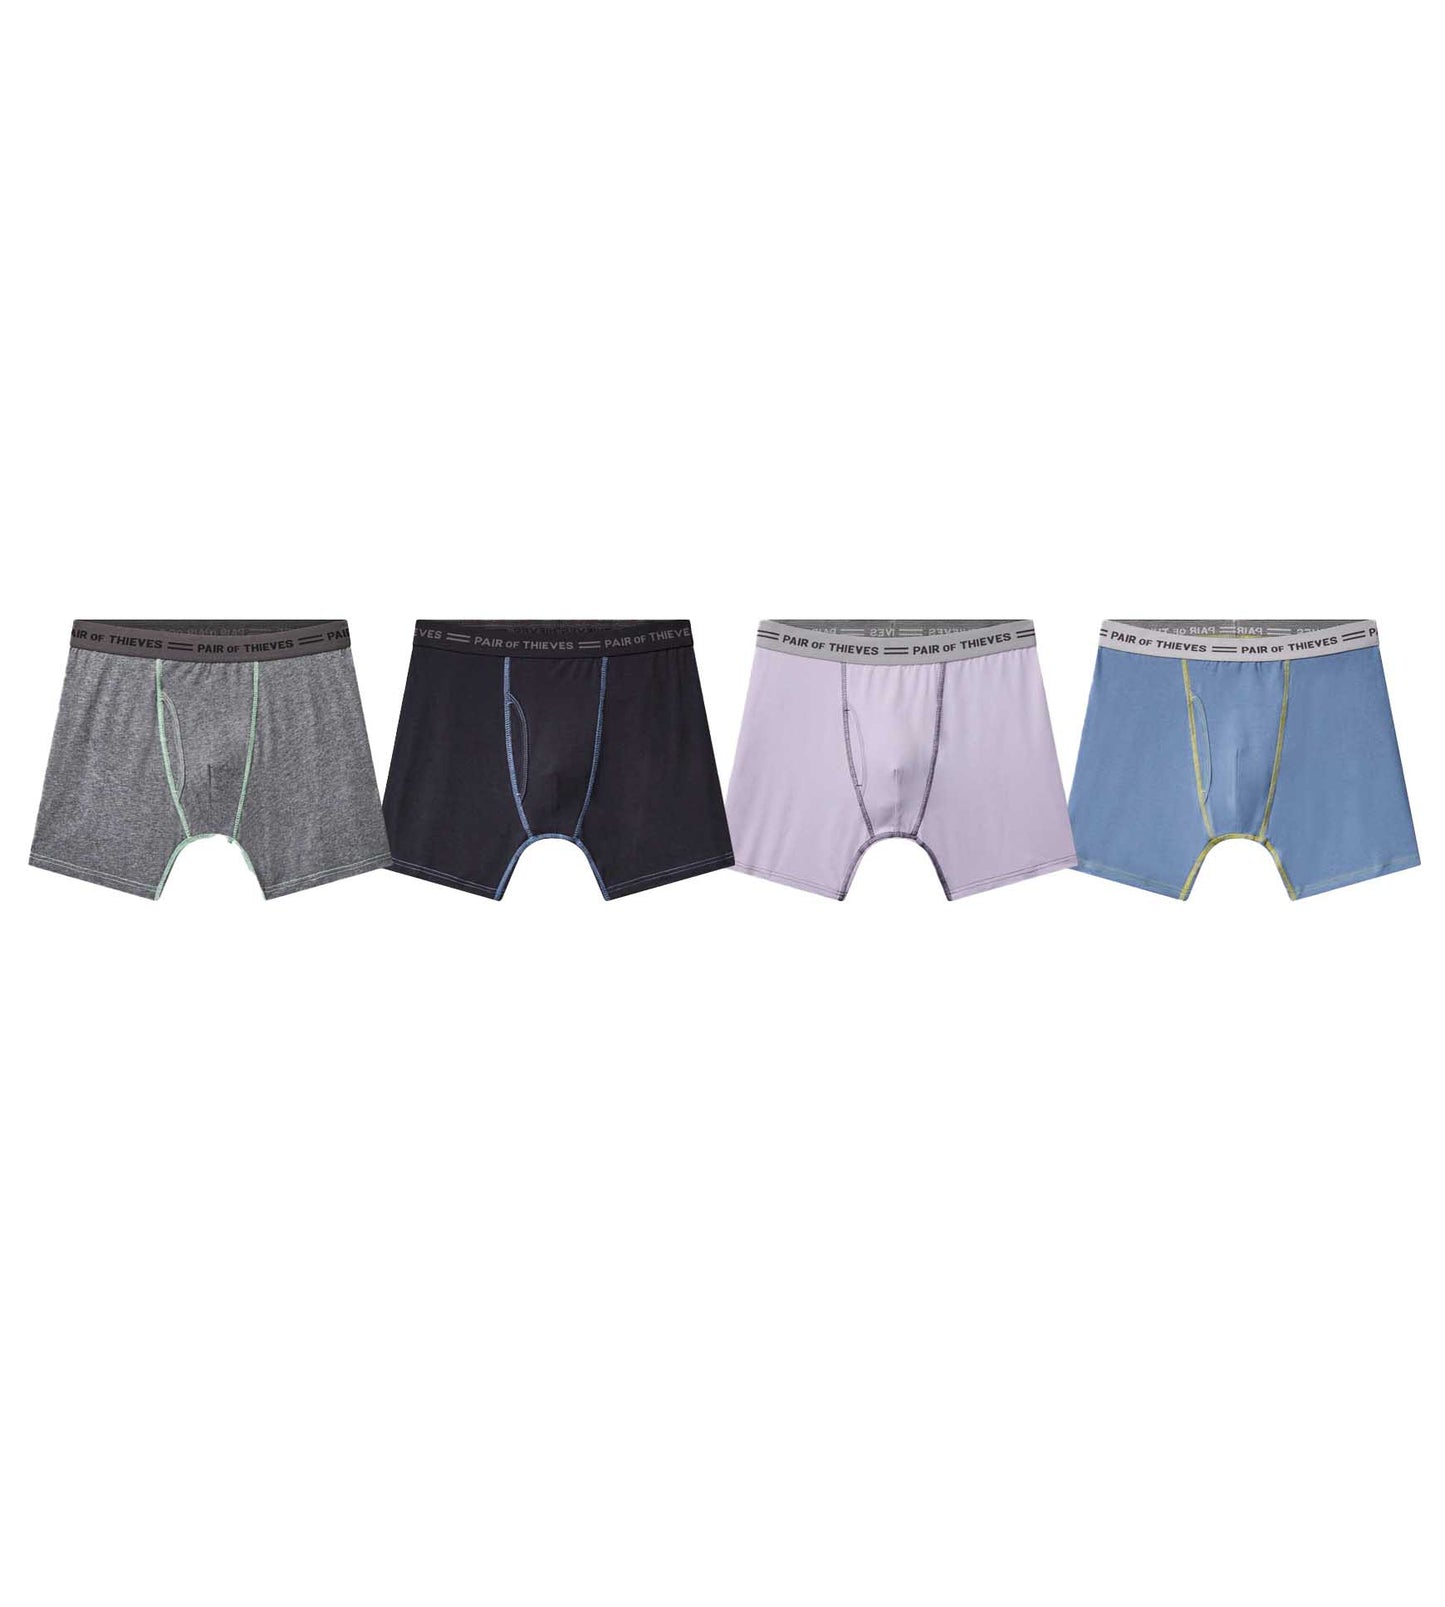 Every Day Kit Boxer Brief 4 Pack - LAVENDER - Pair of Thieves